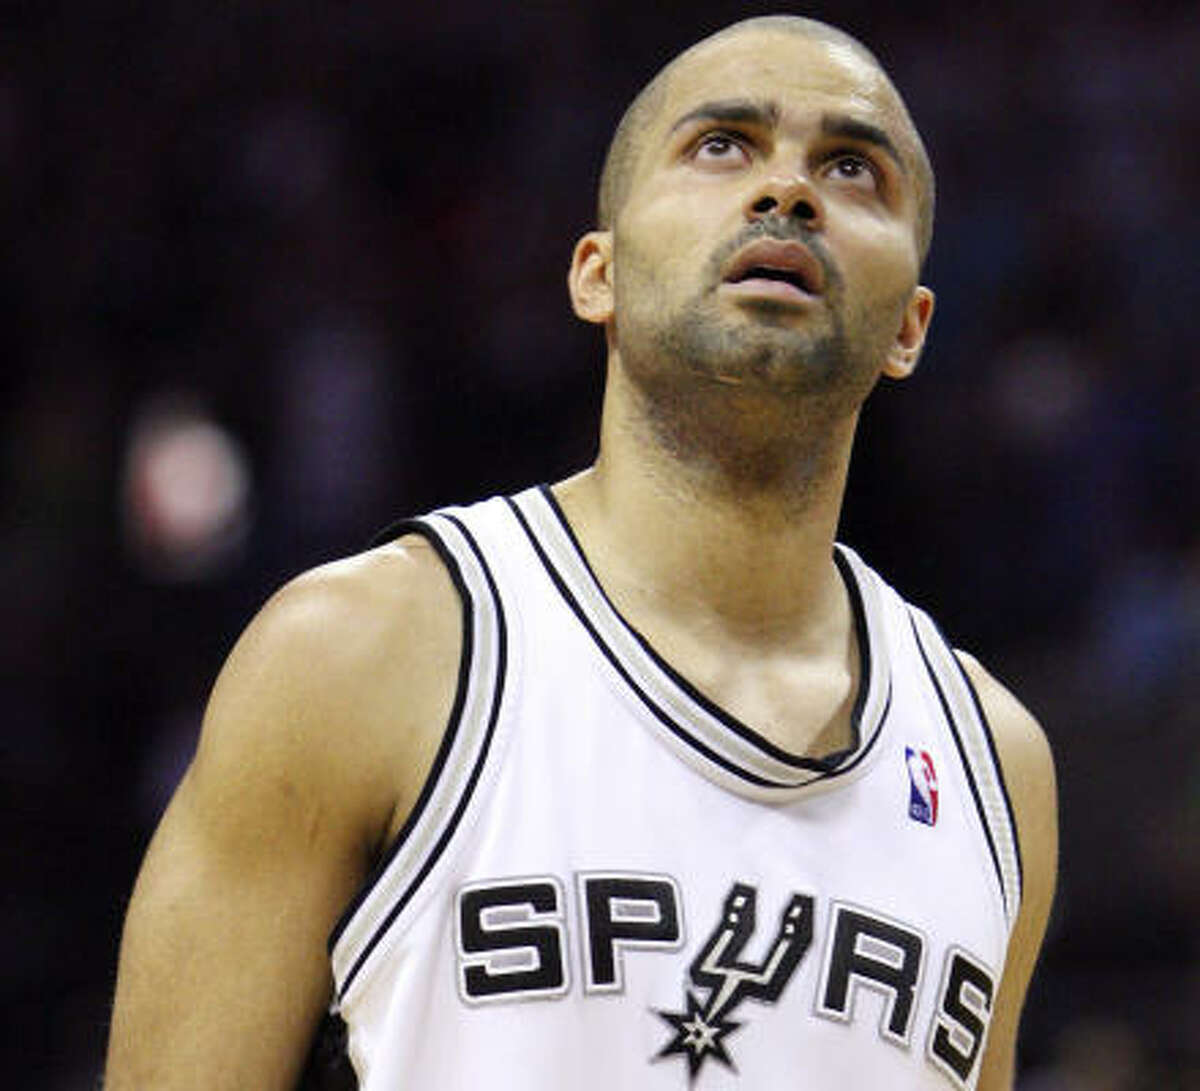 Tony Parker According to sources (including actor Mario Lopez), the marriage between Eva Longoria and the San Antonio Spurs player ended when Longoria found sexy text messages to his teammate's wife. It is still unclear if the affair went beyond 'sexting'.